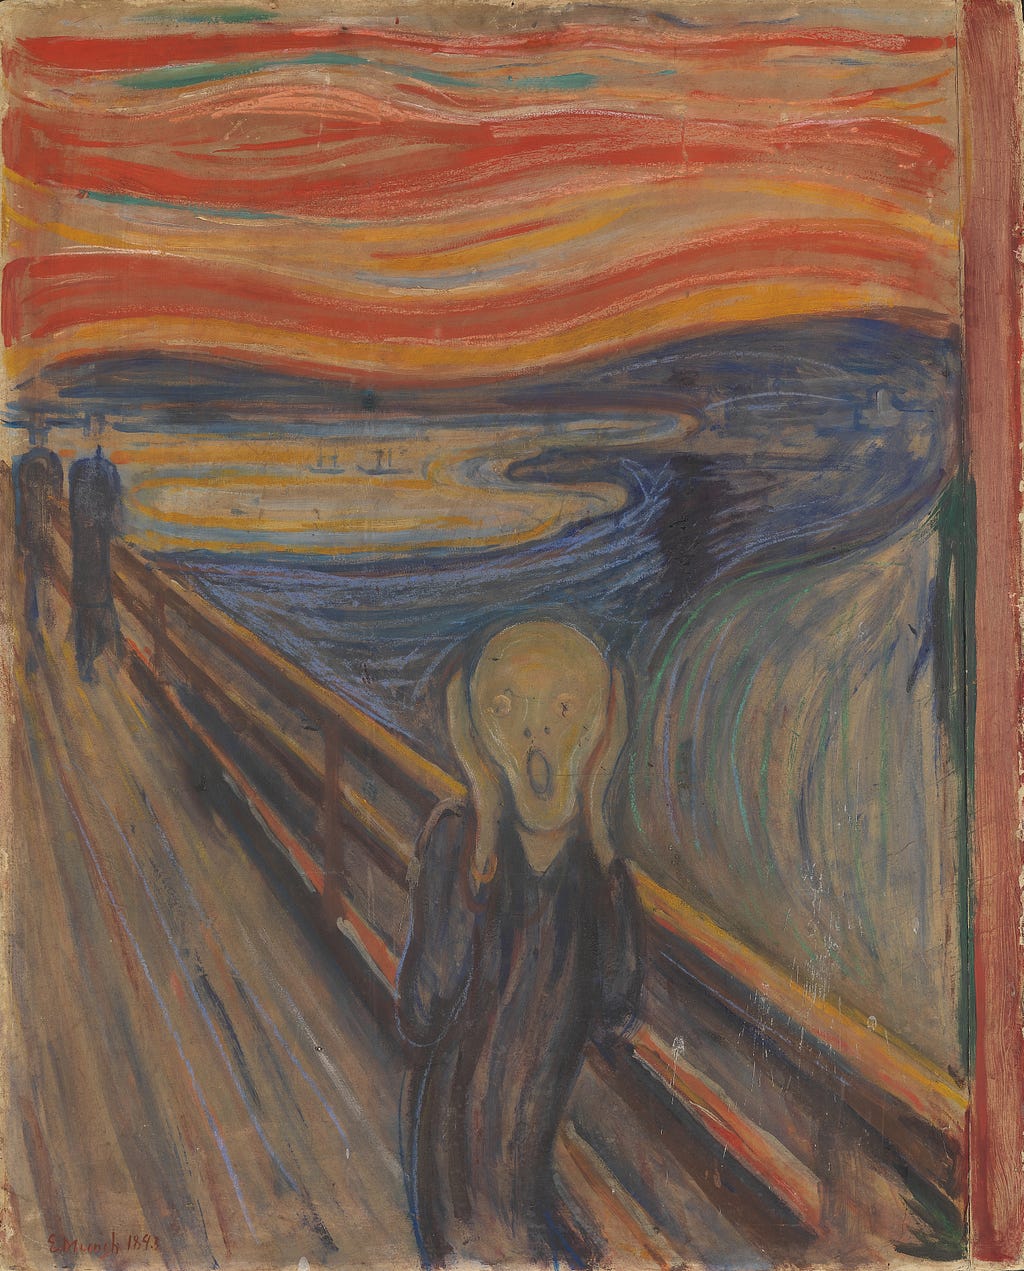 “The Scream” by Edvard Munch (1893); photo from Wikipedia